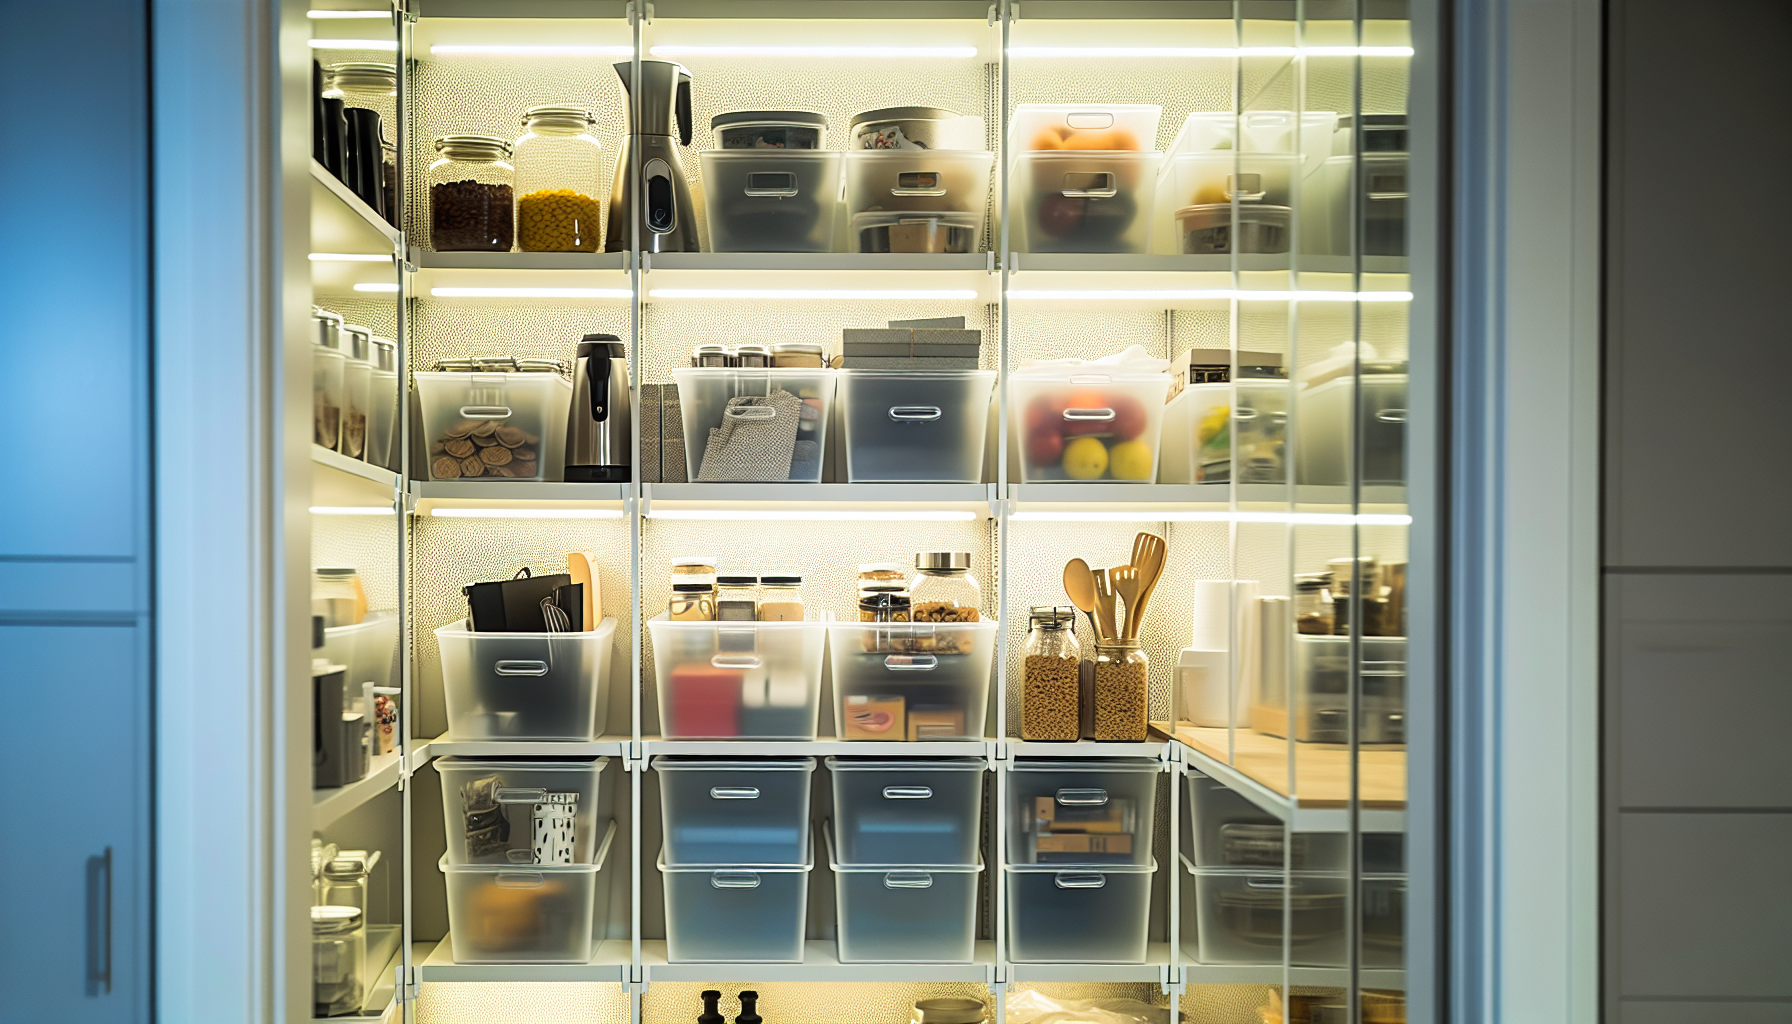 Neat and organized pantry with clear storage bins for small appliances and glass jars